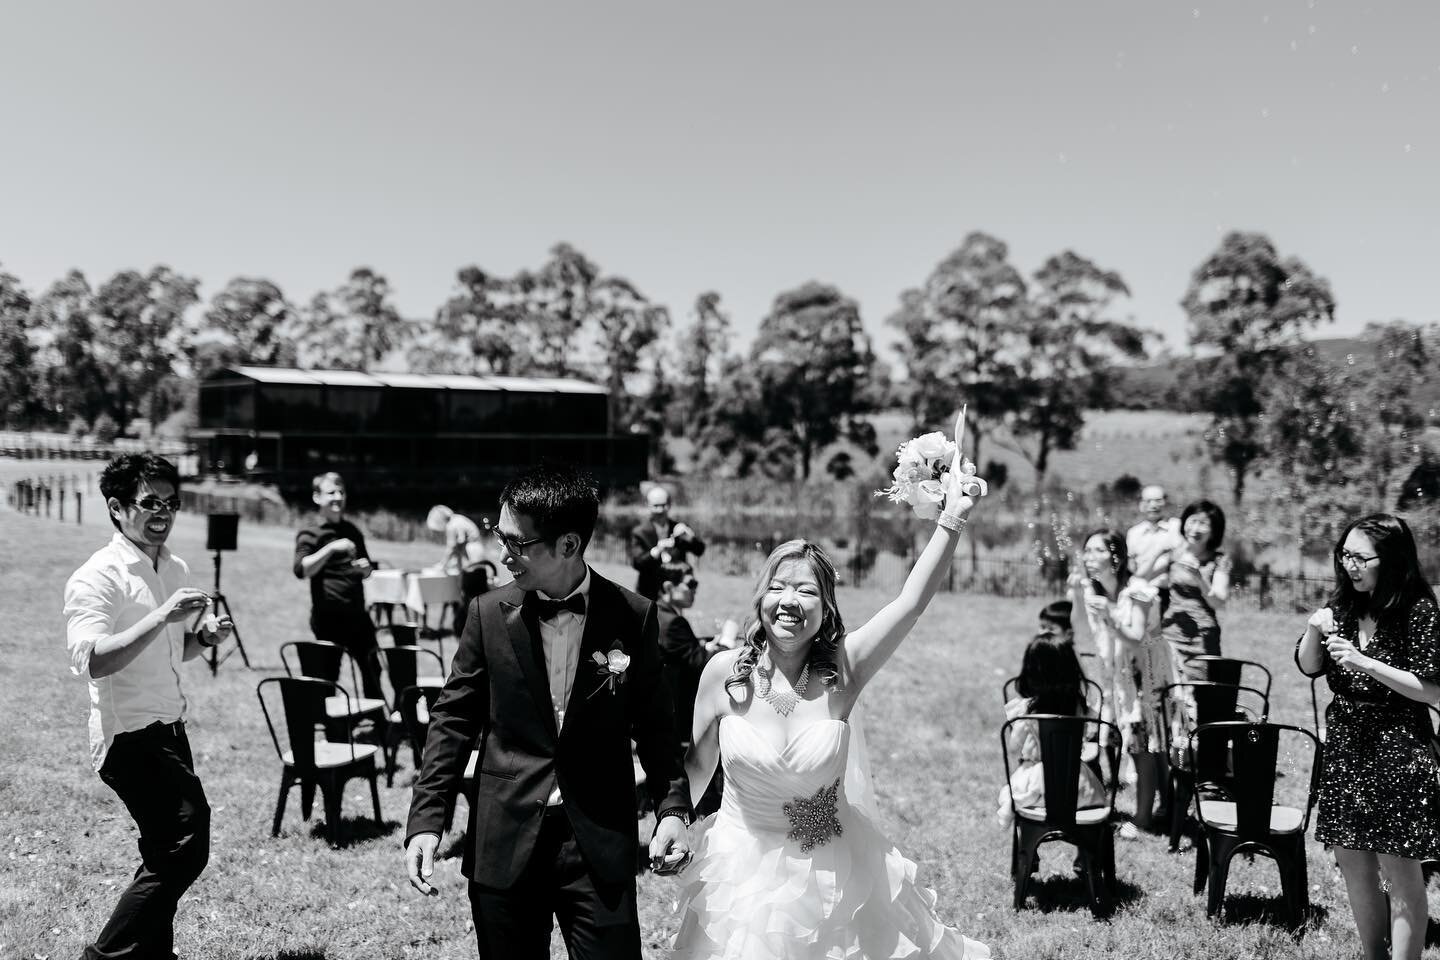 Fabulous flashback to Yannie and Matthew&rsquo;s ceremony at Rochford Winery last December.

It was one of the last ceremonies I conducted while pregnant and I have vivid memories of her kicking up a storm throughout (hopefully a good sign for Y &amp